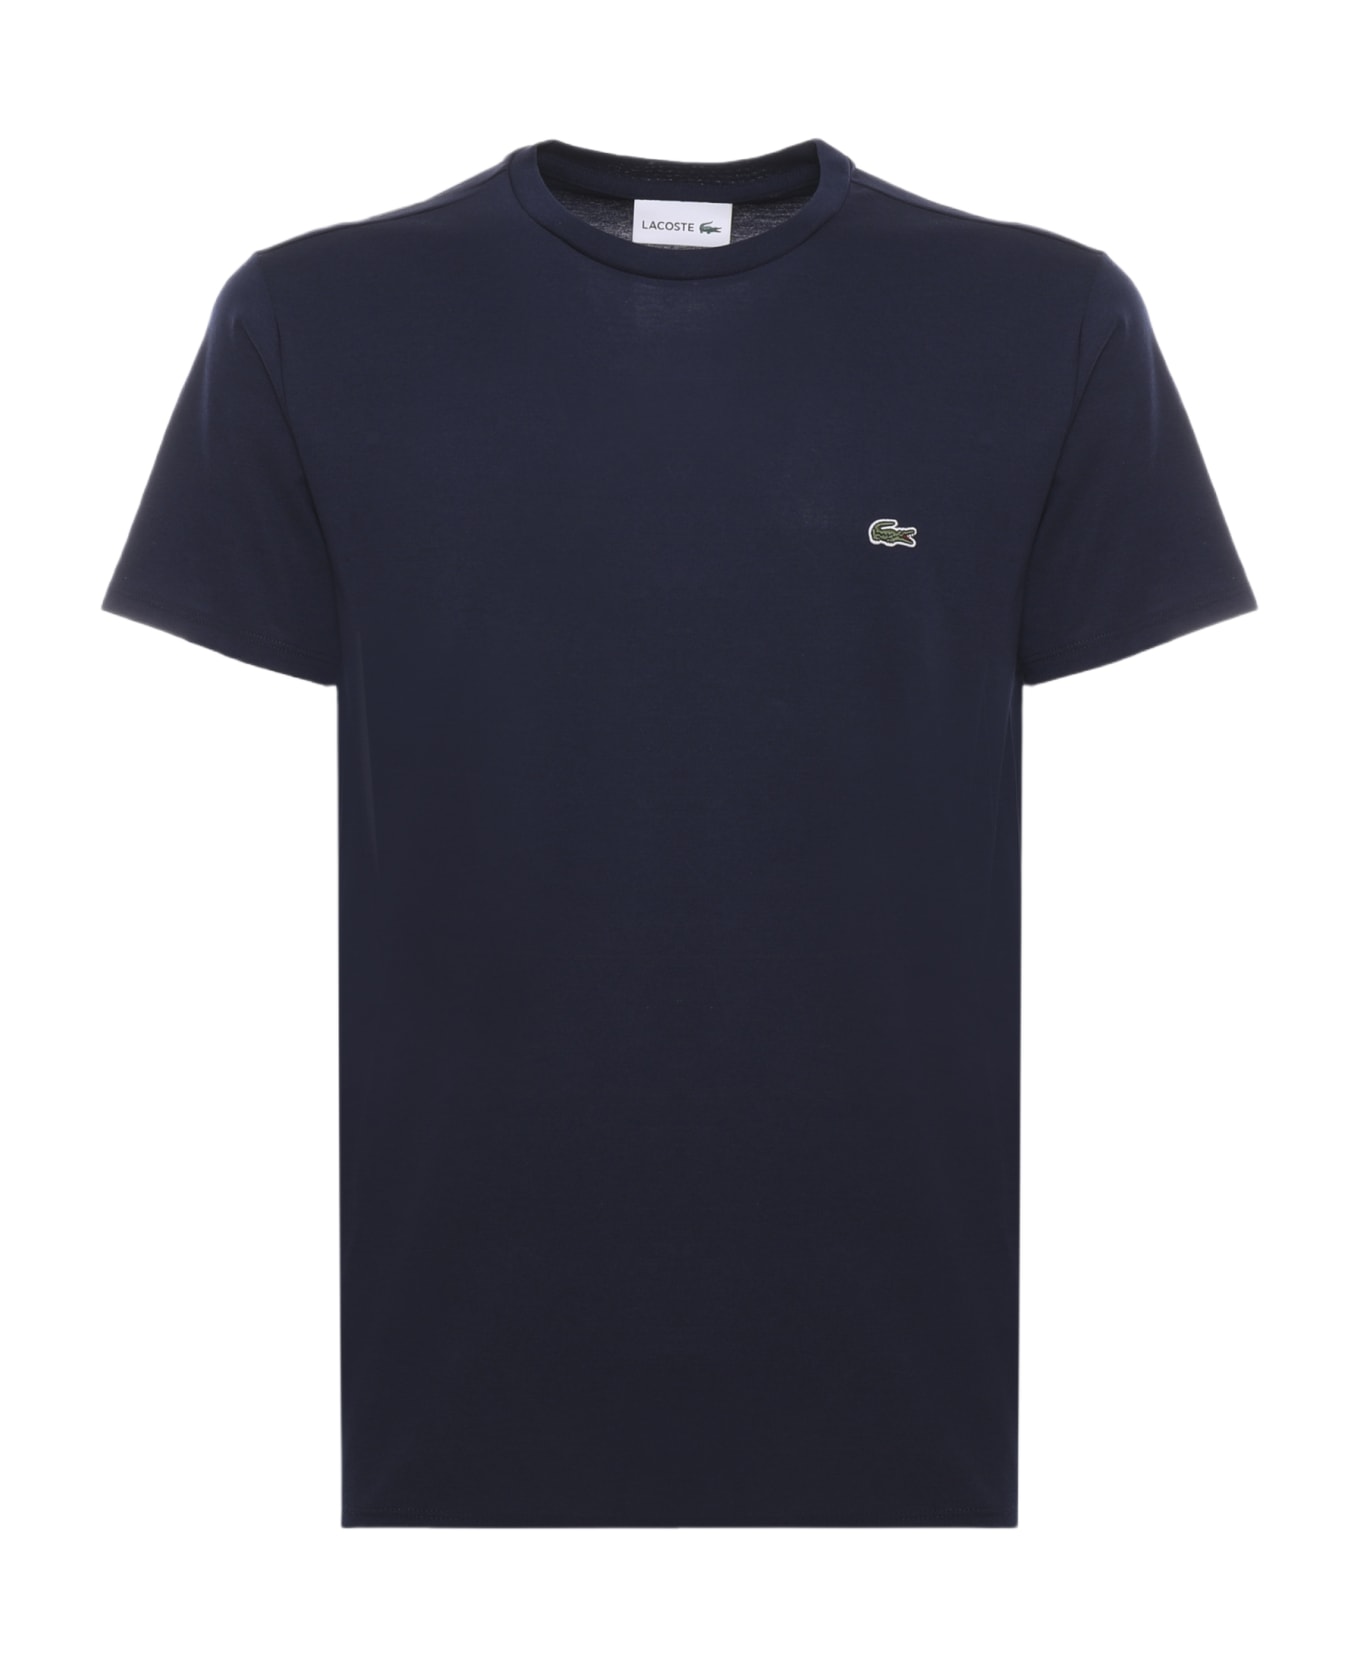 Lacoste Navy Blue T-shirt In Cotton Jersey - Marine